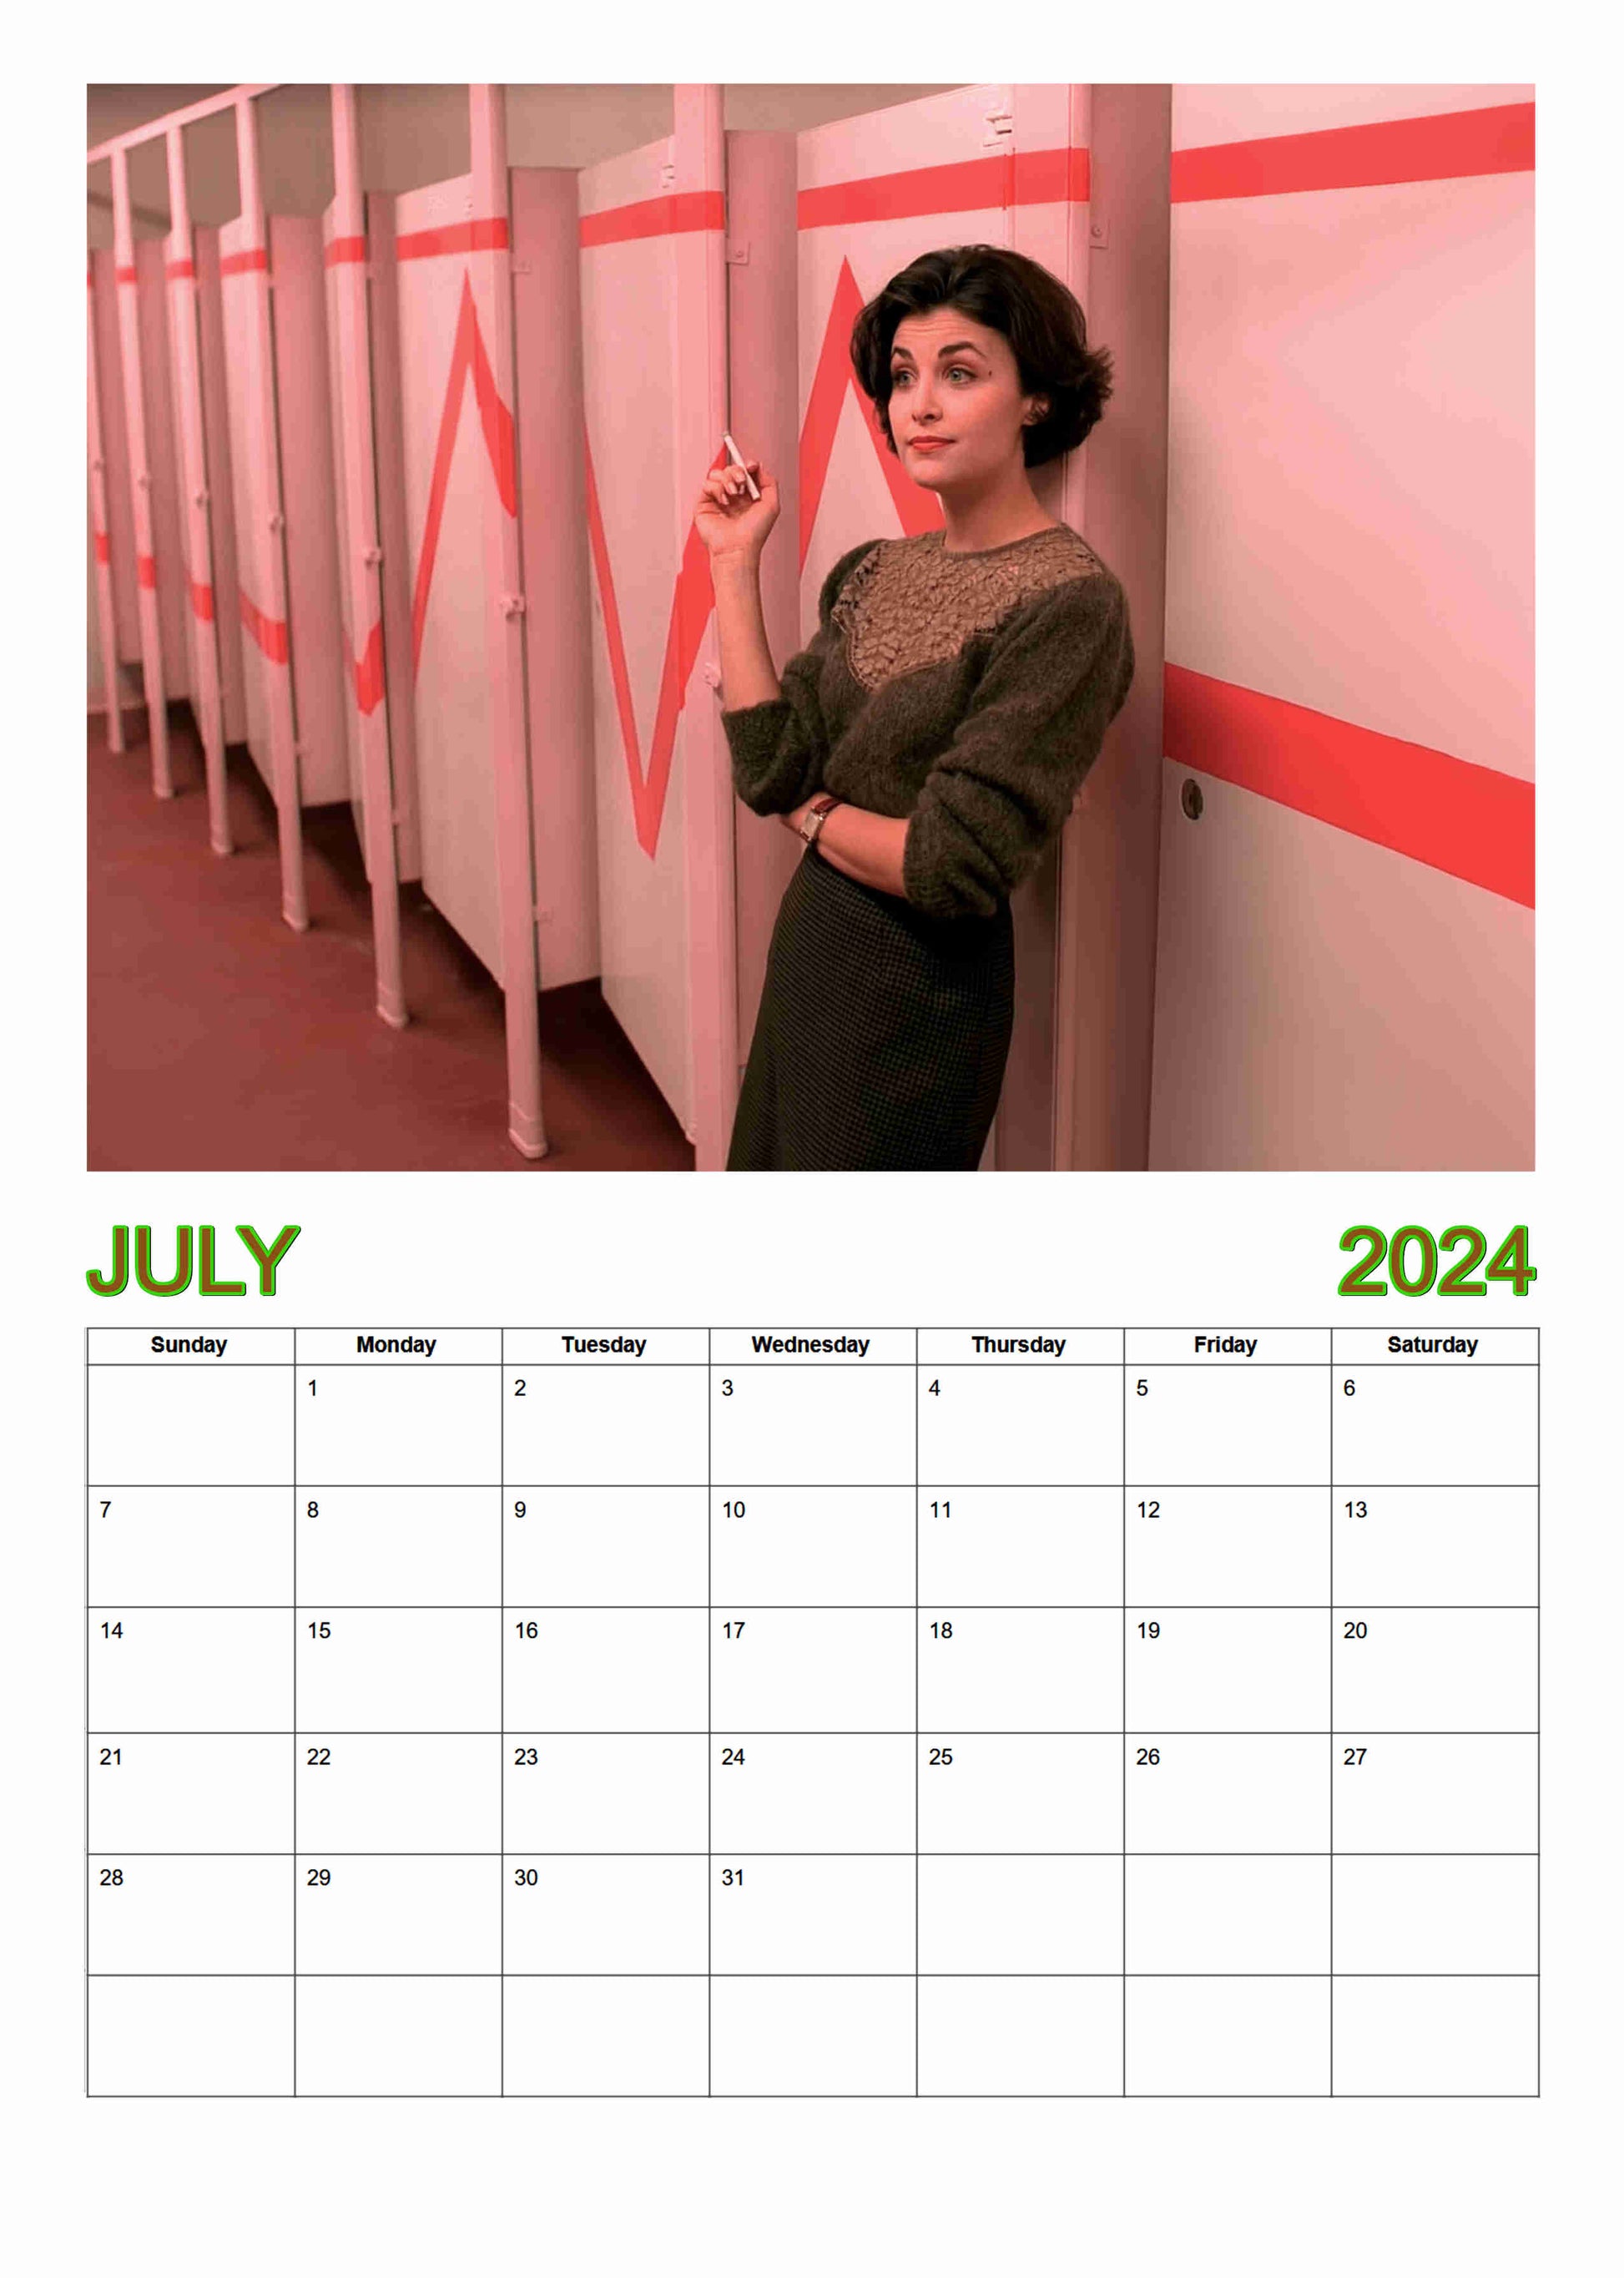 Preview of the month of July featuring Audrey Horne smoking